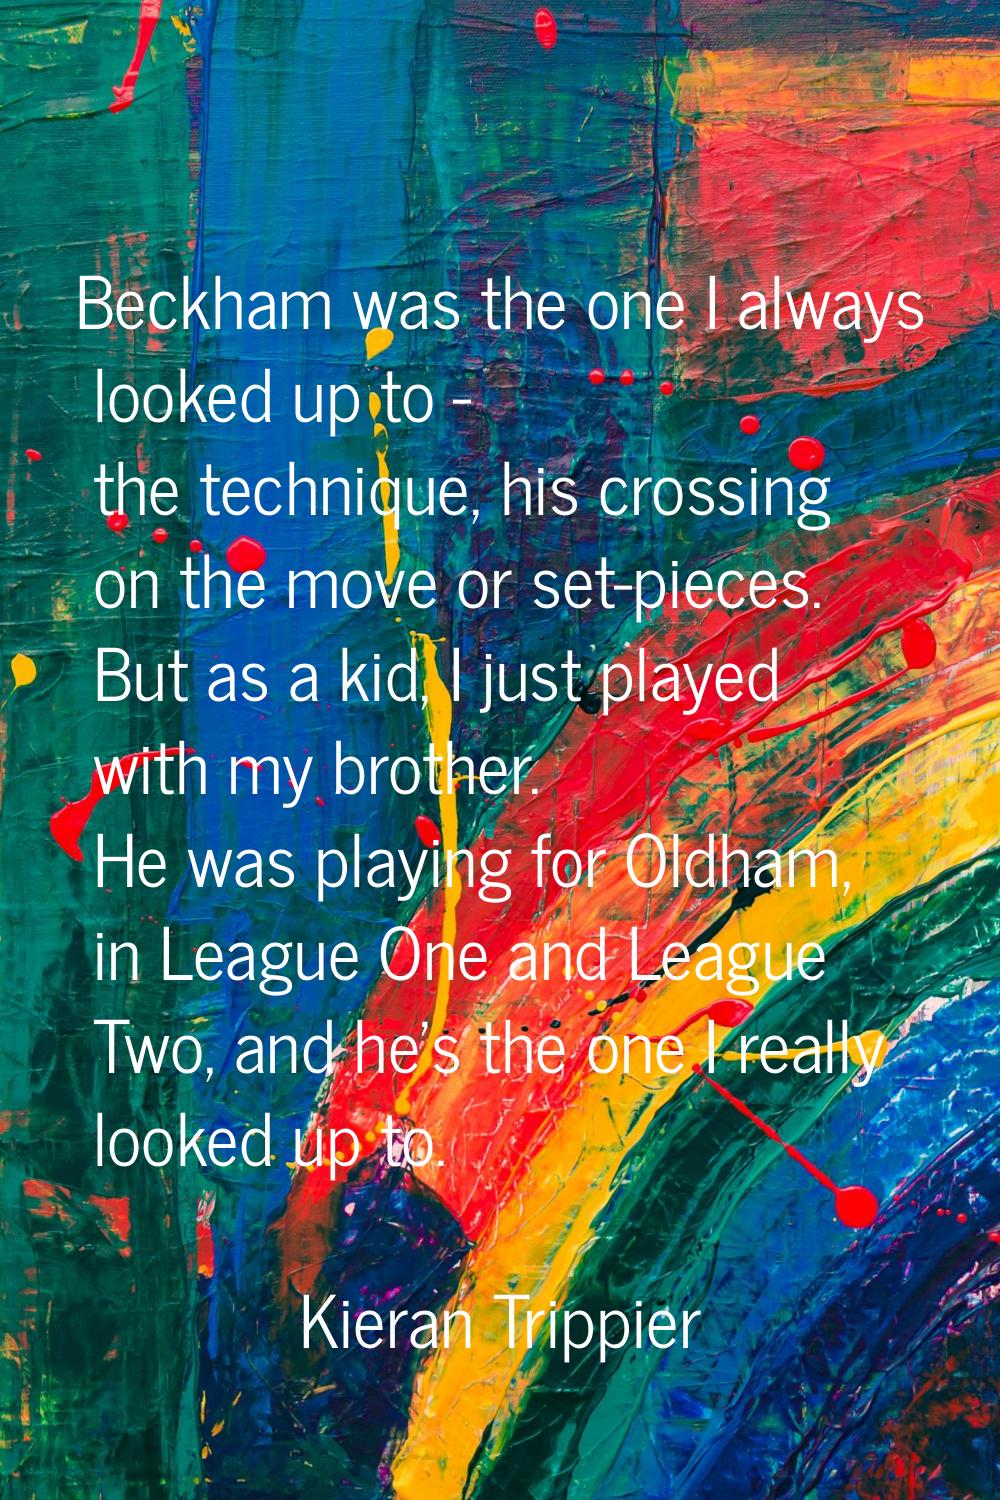 Beckham was the one I always looked up to - the technique, his crossing on the move or set-pieces. 